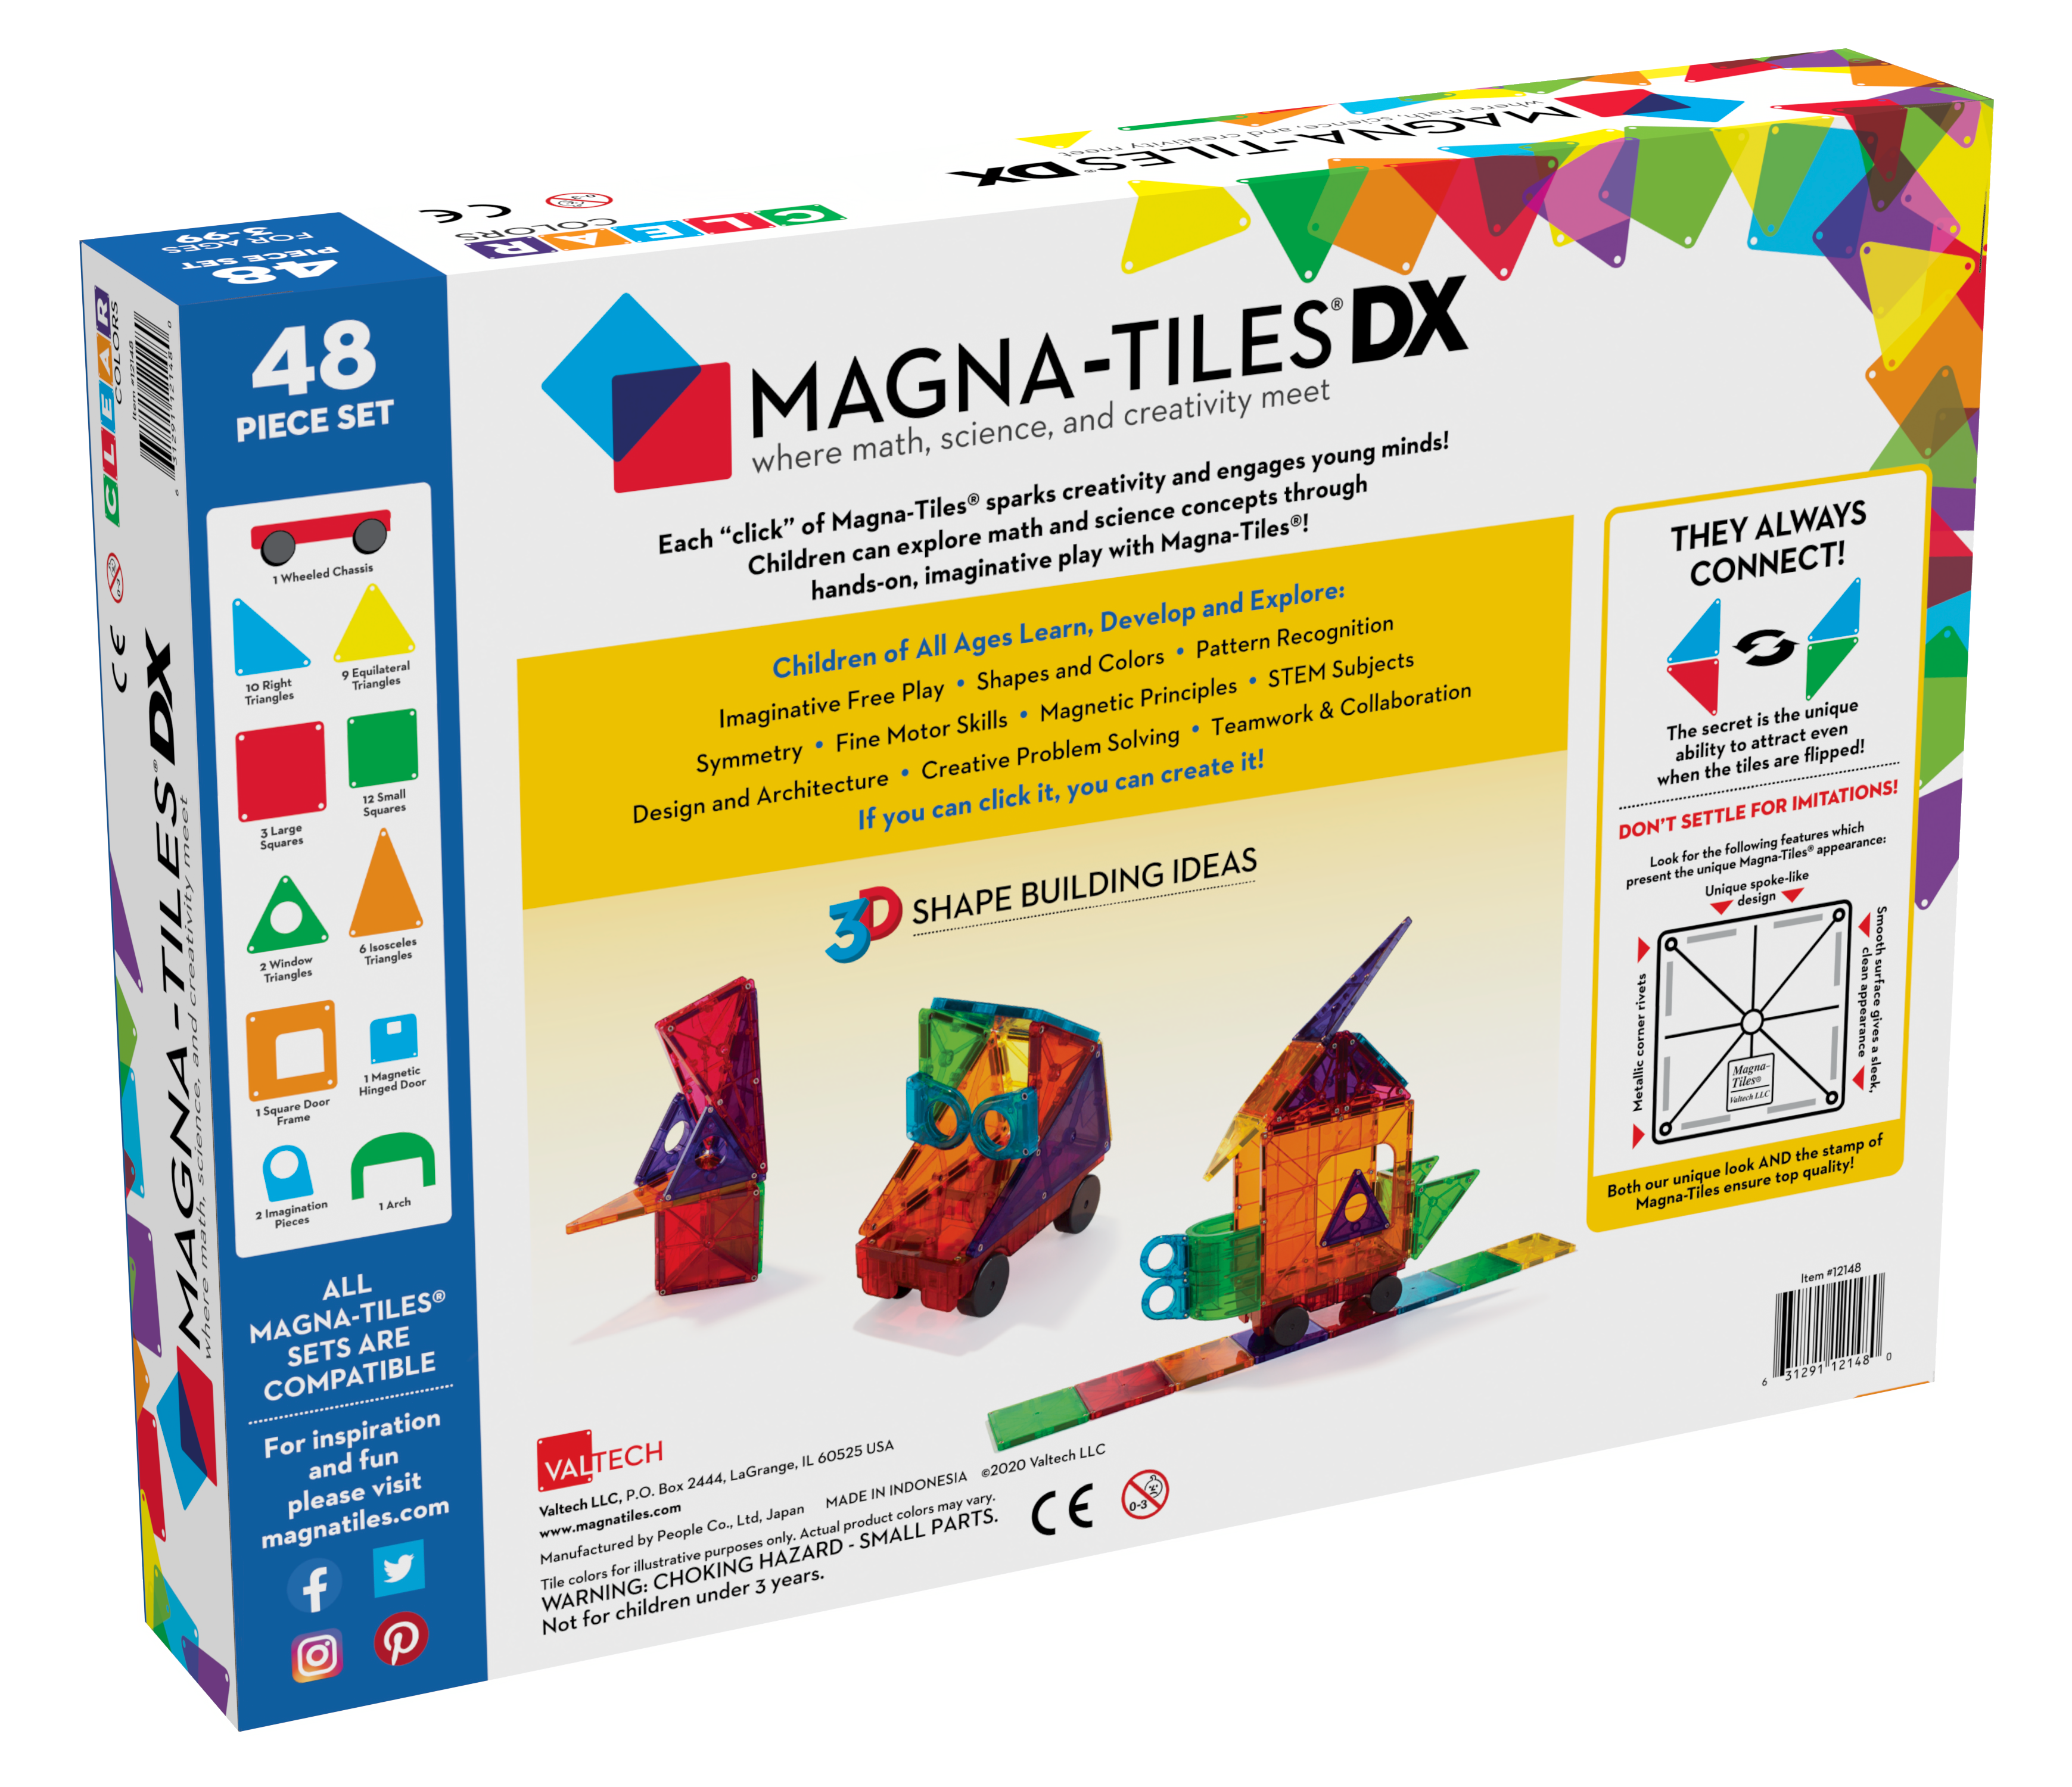 New in Box Magna-Tiles 12148 Clear Colors 48 pc DX Magnetic Toy Building Set 3+ 